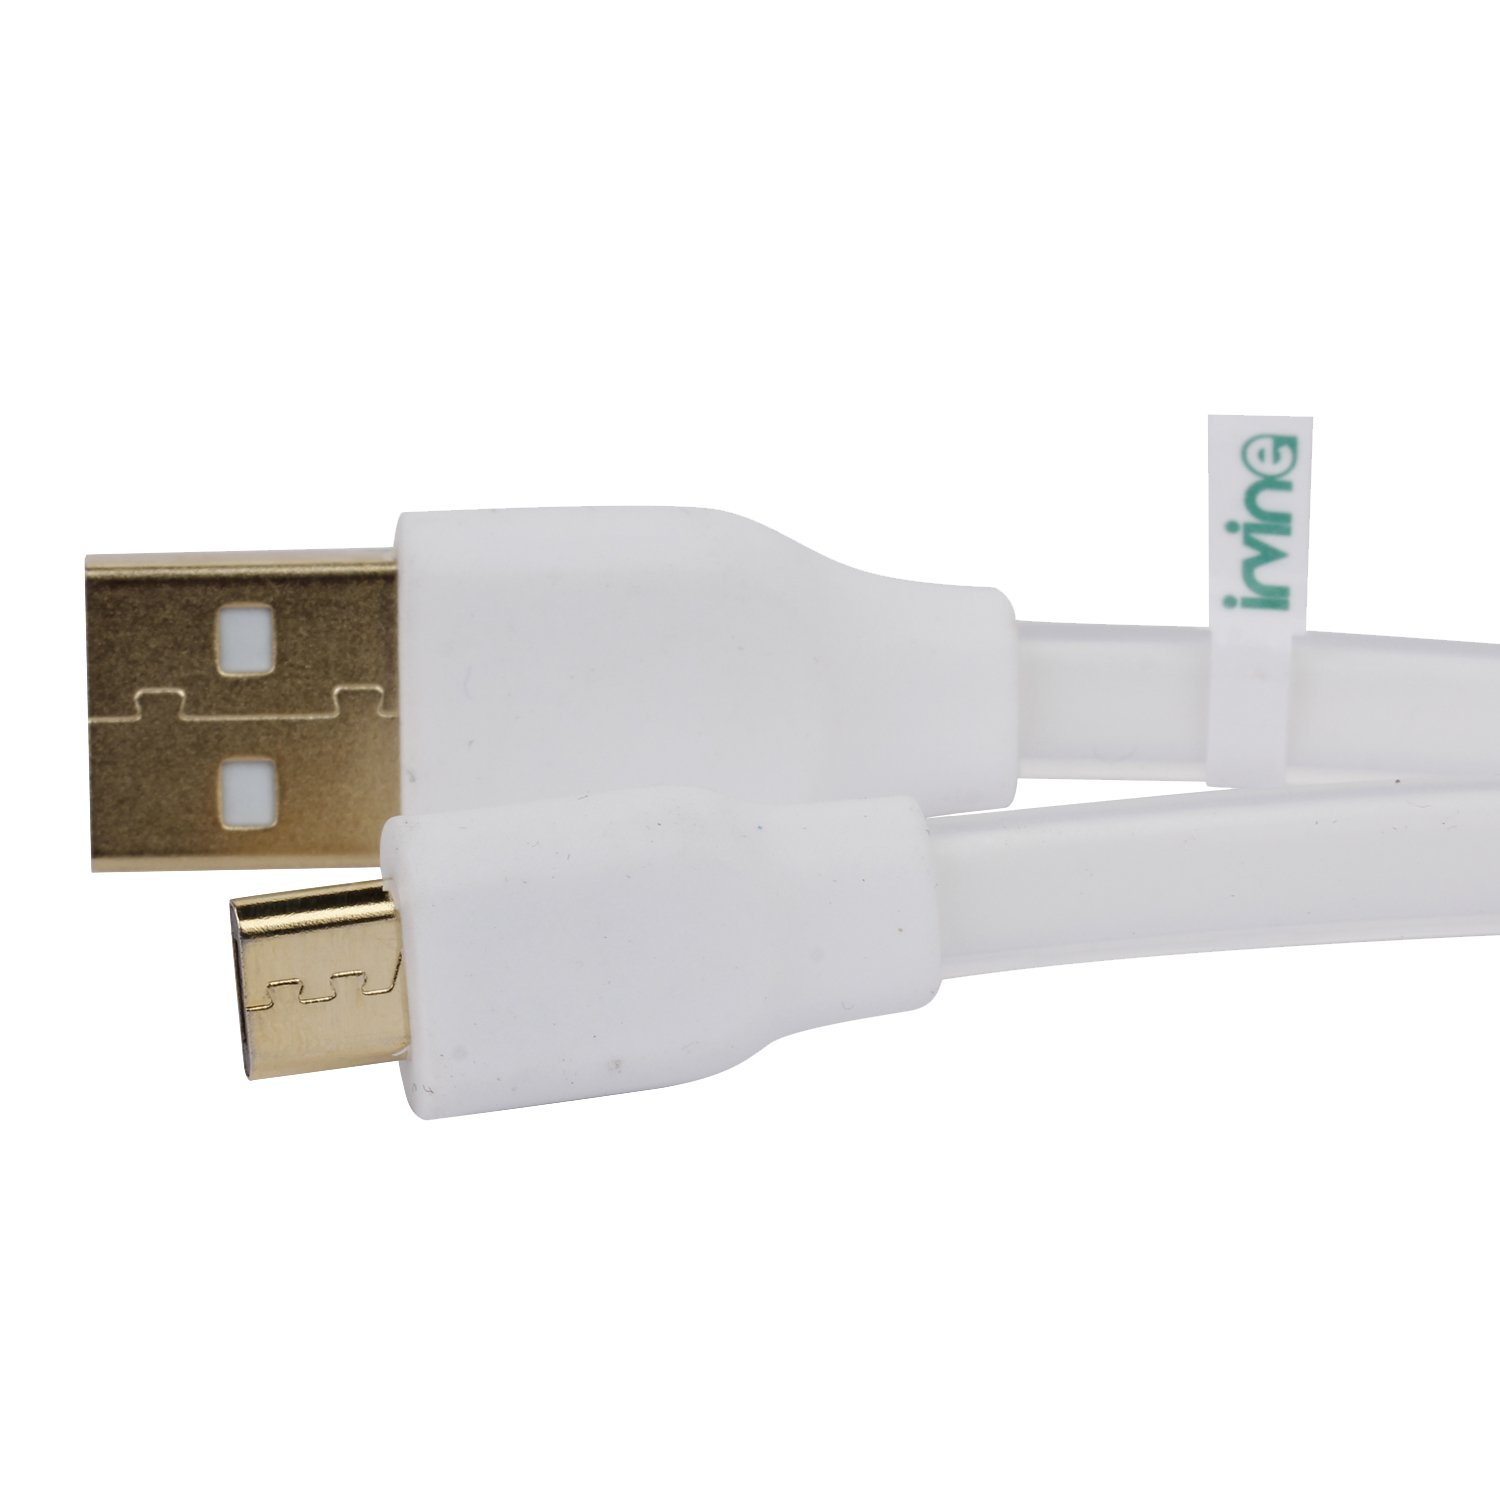 Irvine Micro USB Cable with 2 year warranty